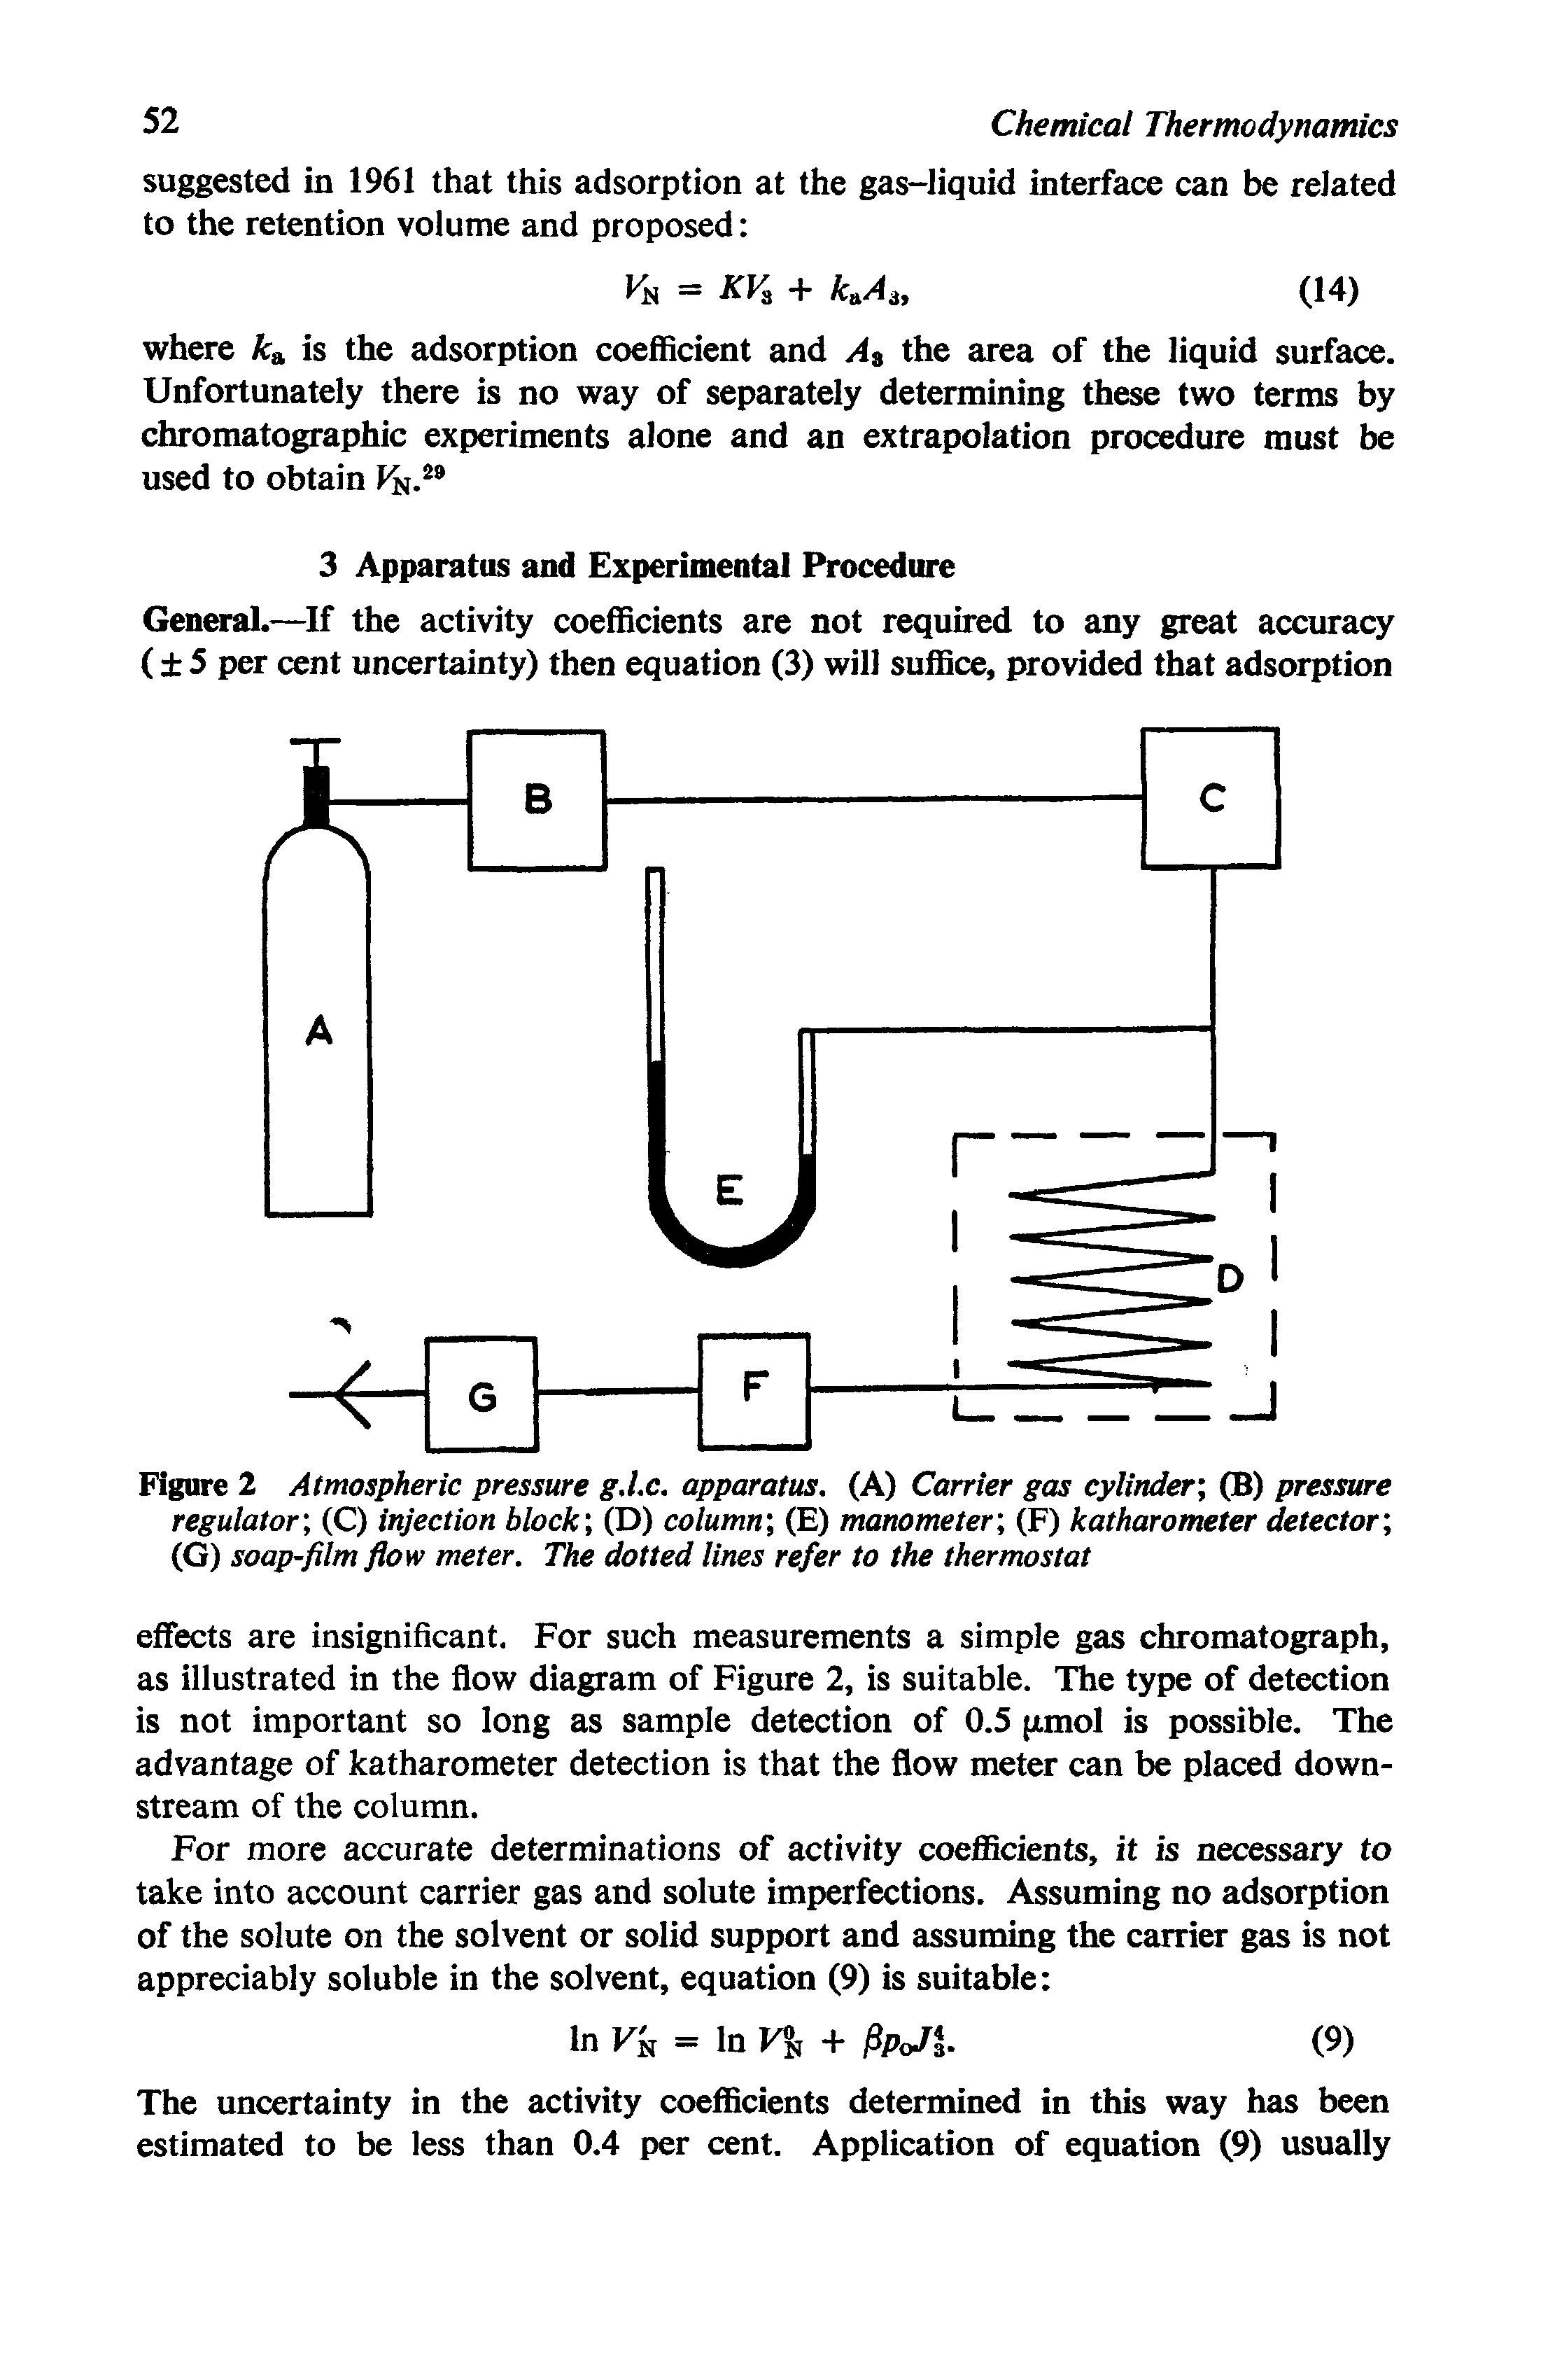 Figure 2 Atmospheric pressure g.l.c. apparatus. (A) Carrier gas cylinder , (B) pressure regulator, (C) injection block, (D) column , (E) manometer , (F) katharometer detector, (G) soap-film flow meter. The dotted lines refer to the thermostat...